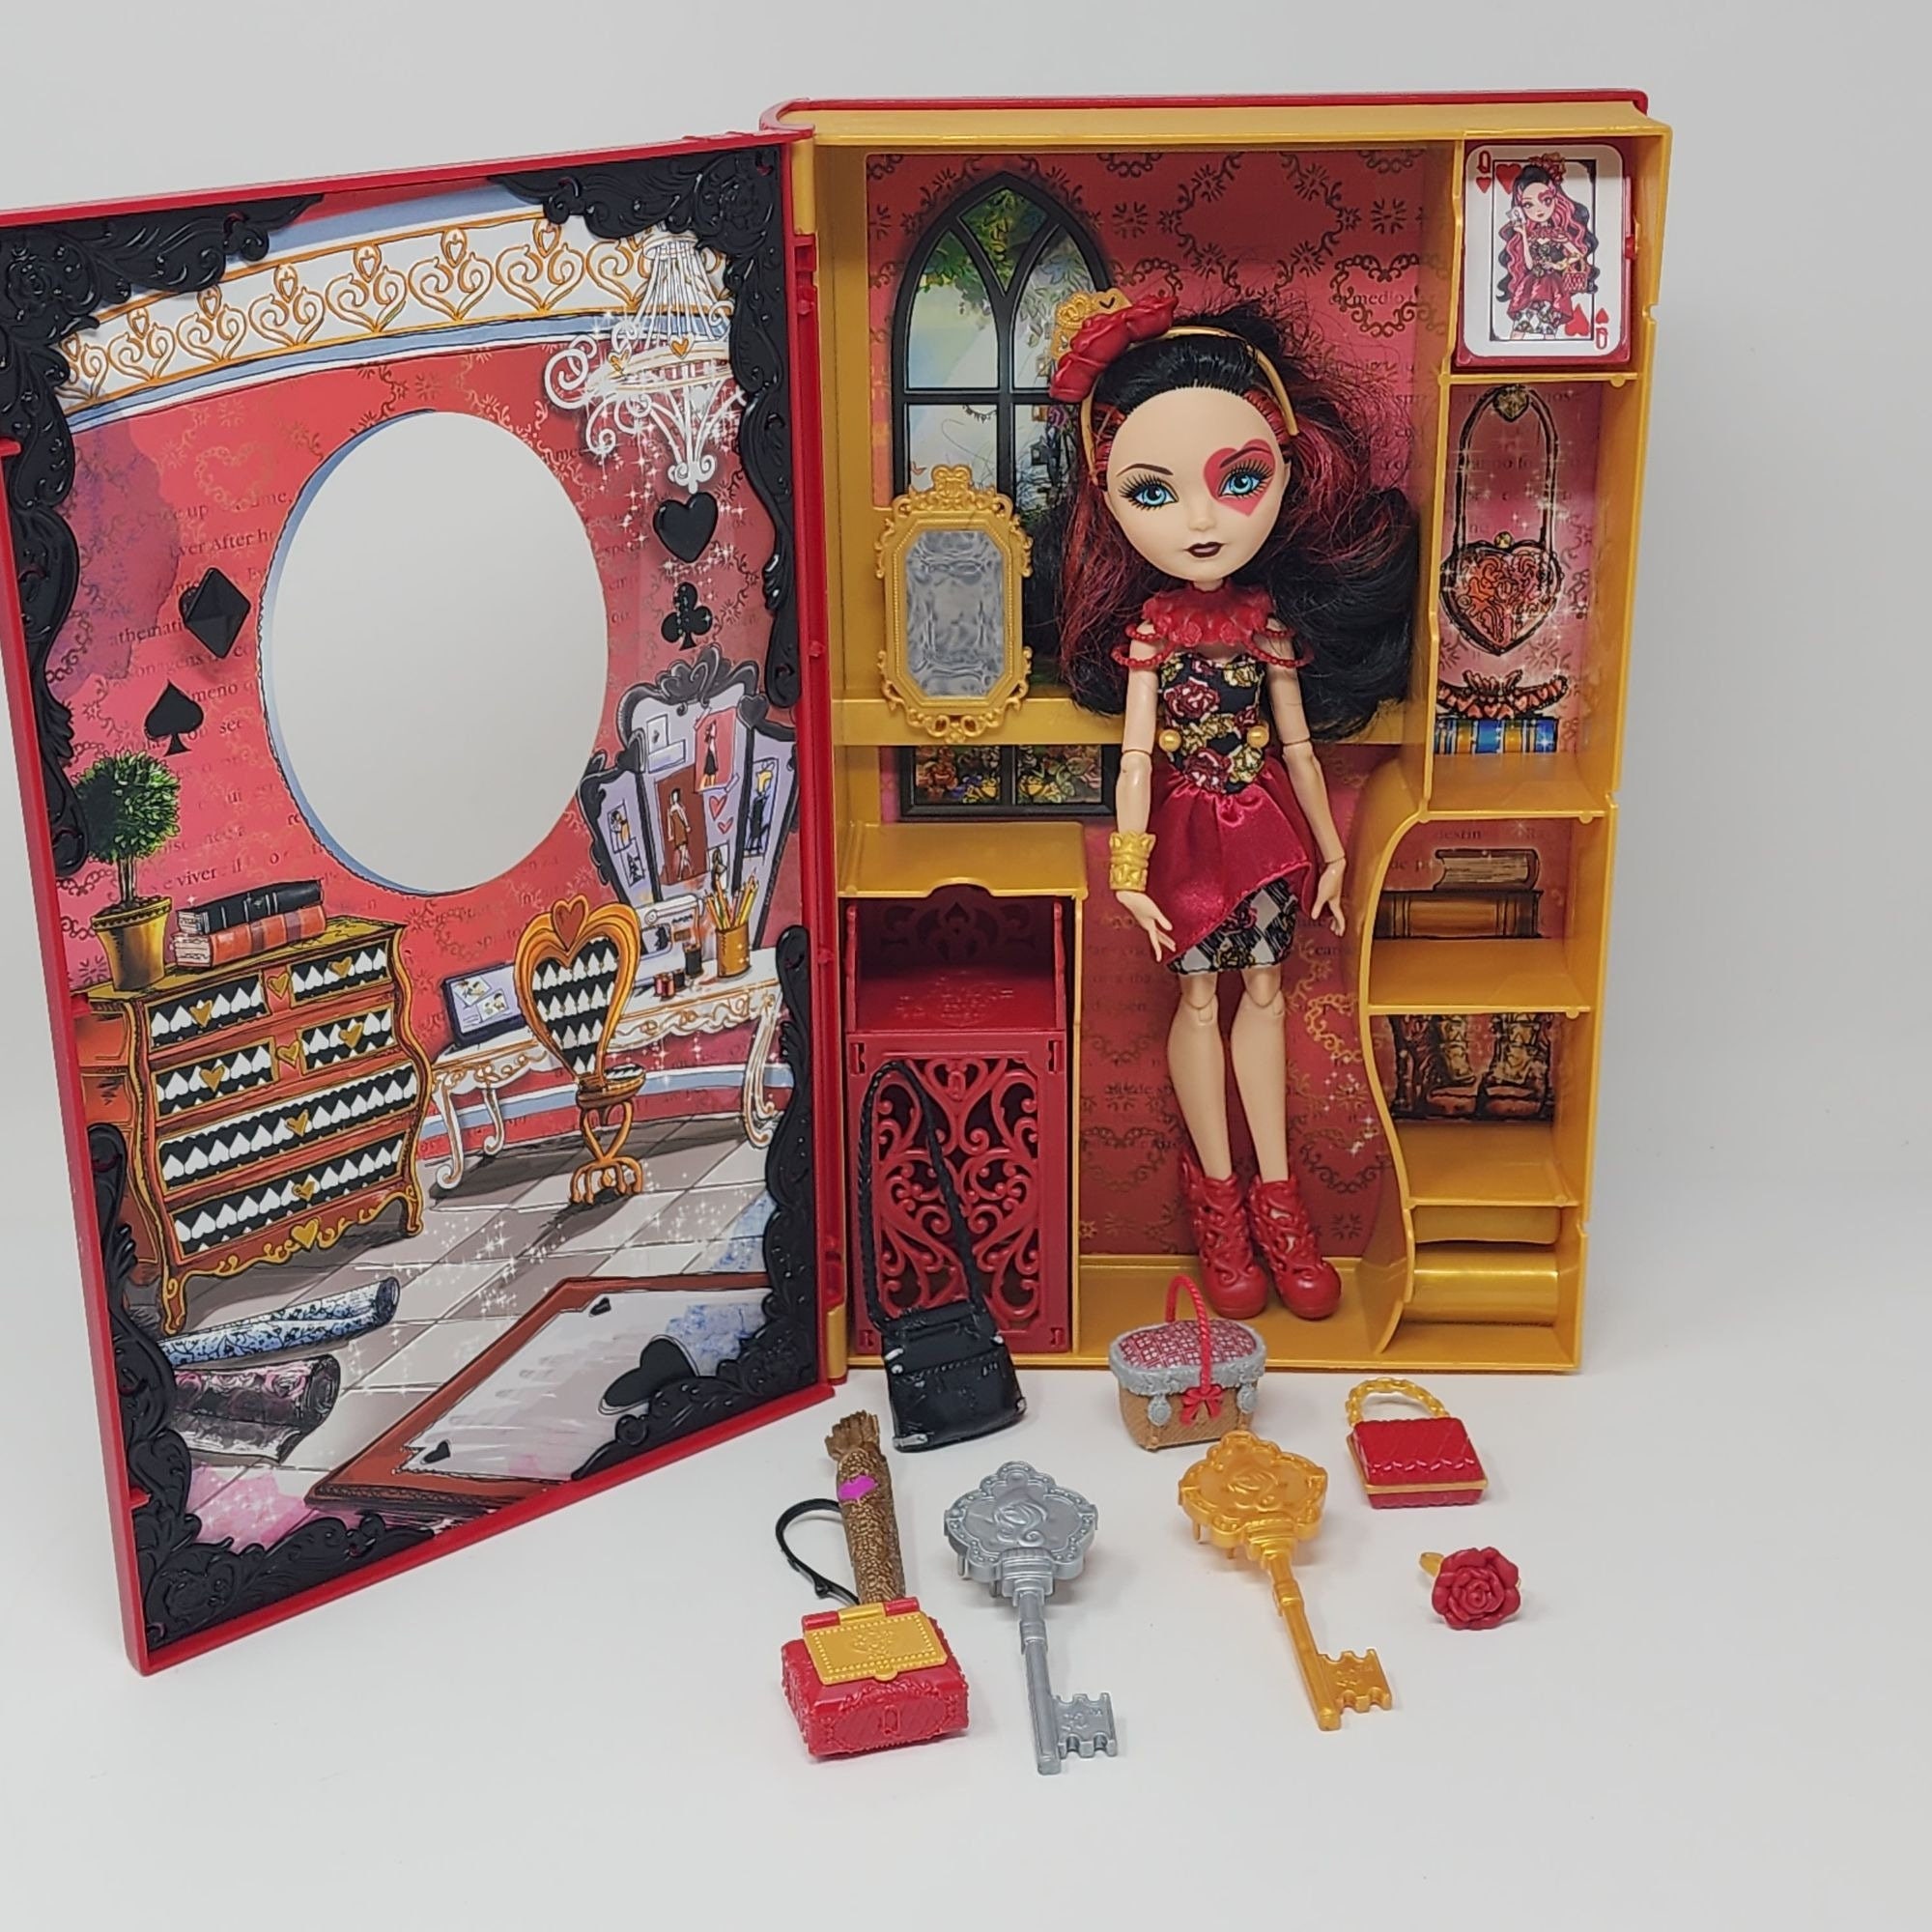 Ever After High LIZZIE HEARTS Ever After ROYAL Doll 1st Edition ORIGINAL  RELEASE 